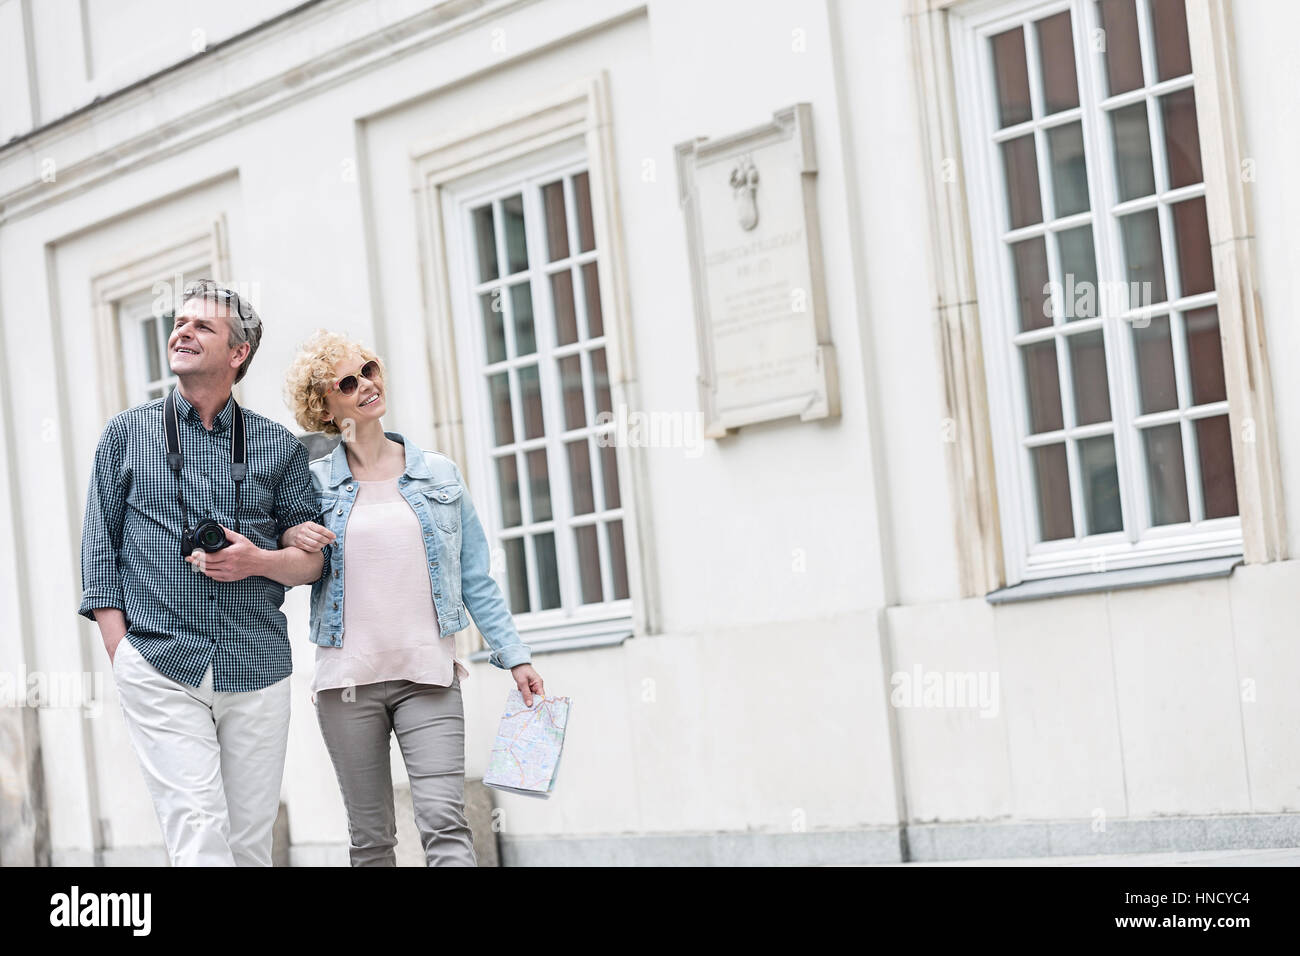 Happy middle-aged tourist couple walking arm in arm by building Stock Photo